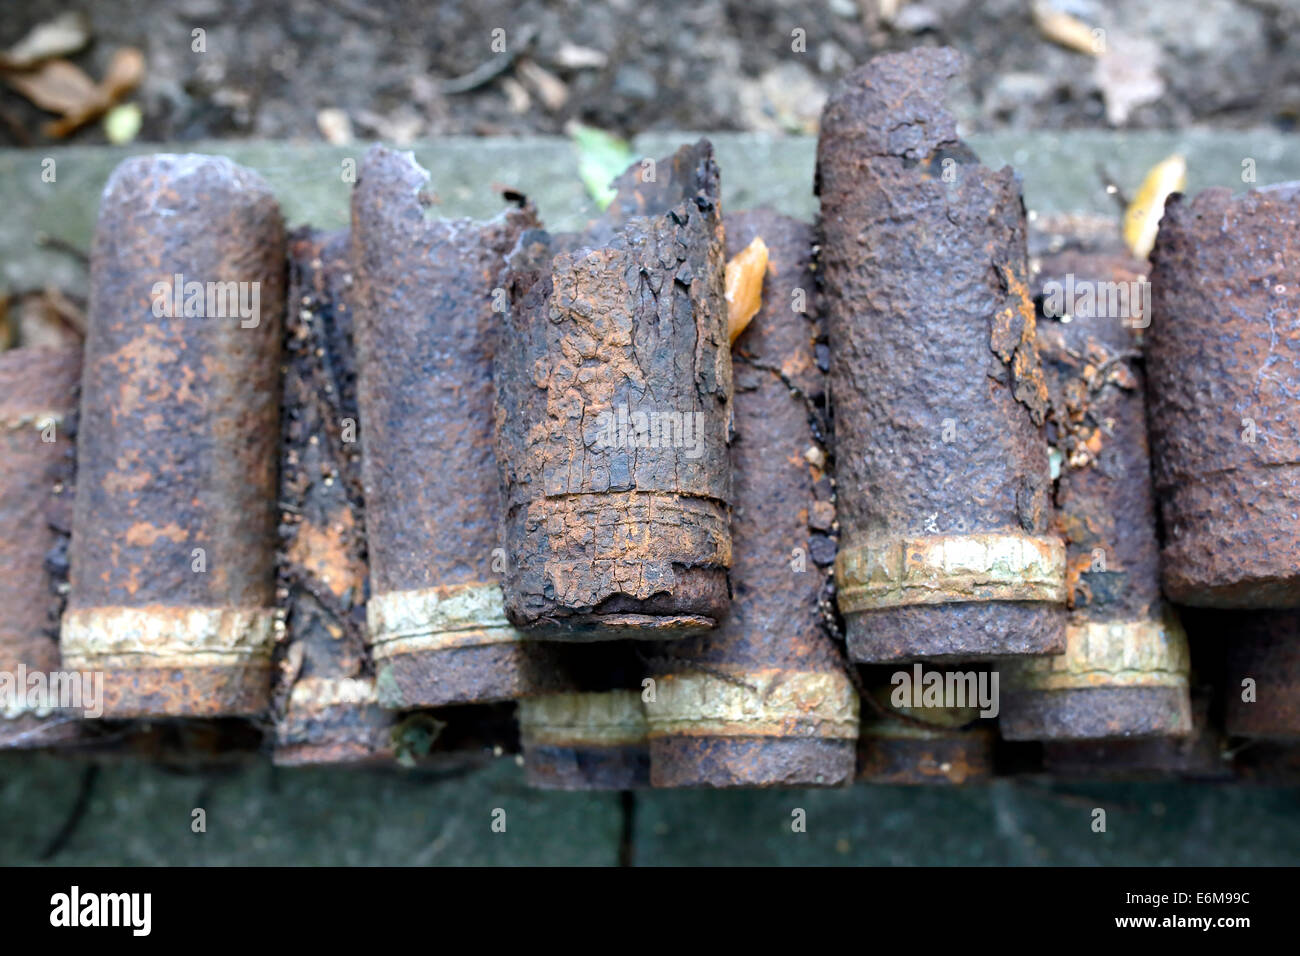 world war one - What was this 1917 shell casing used for